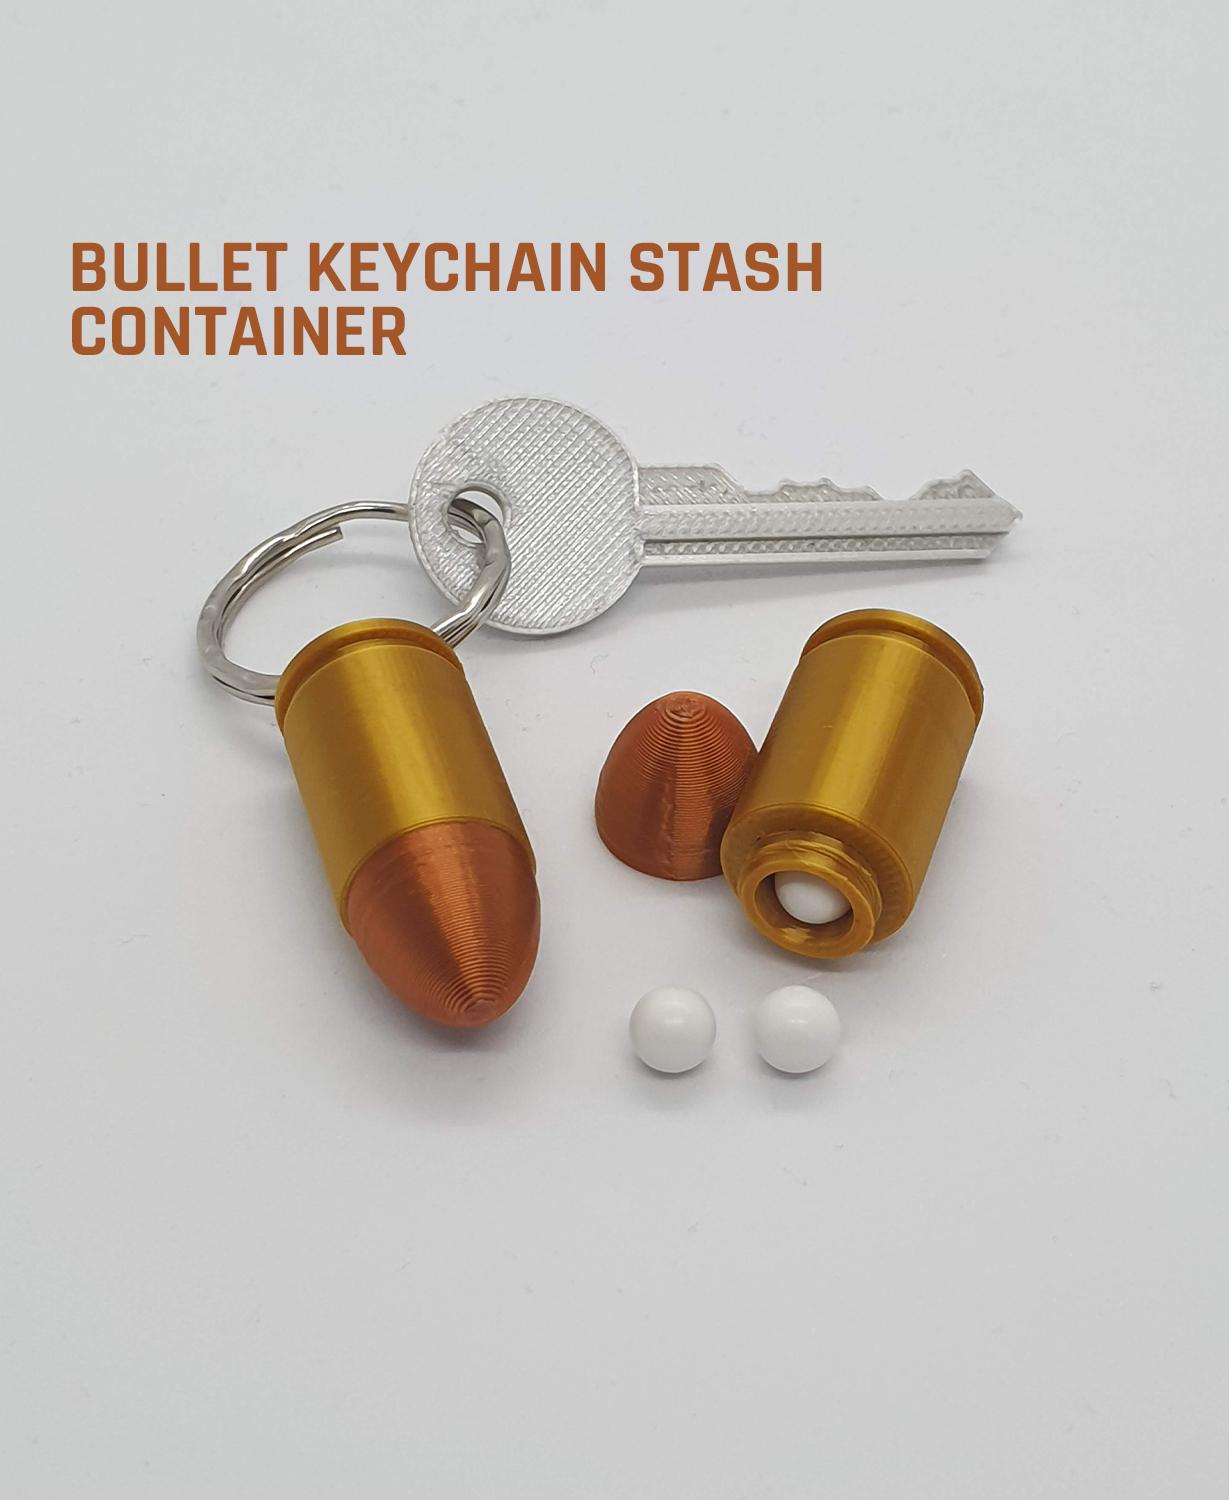 Bullet Keychain Stash Container 3d model